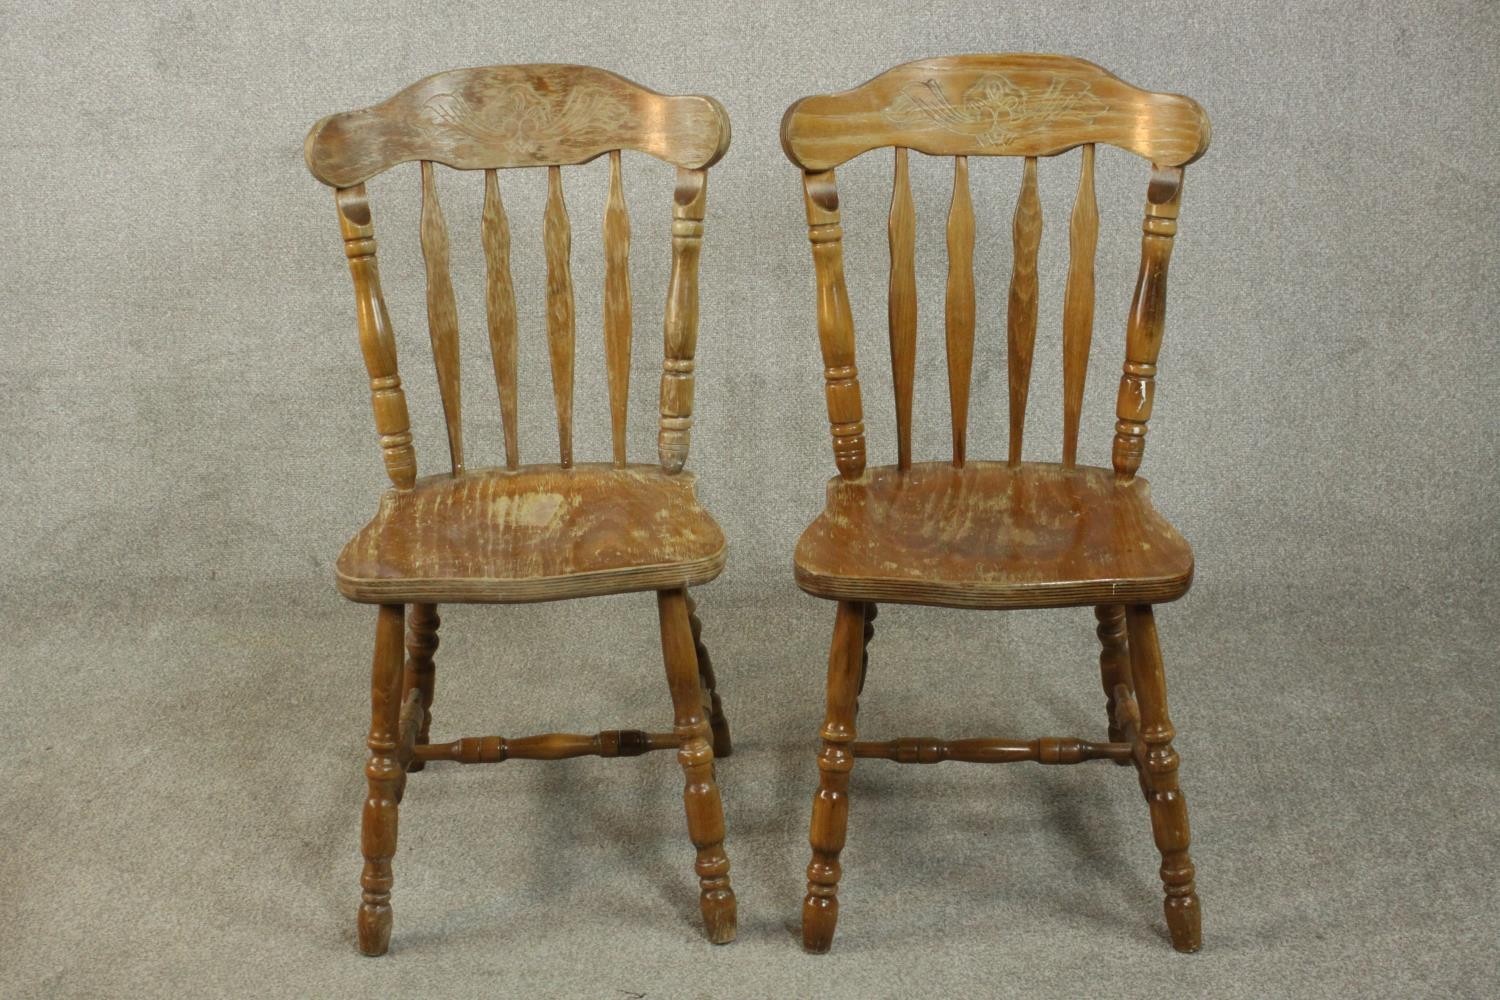 A pair of continental Windsor style plywood and pine kitchen chairs, with carved bar backs, shaped